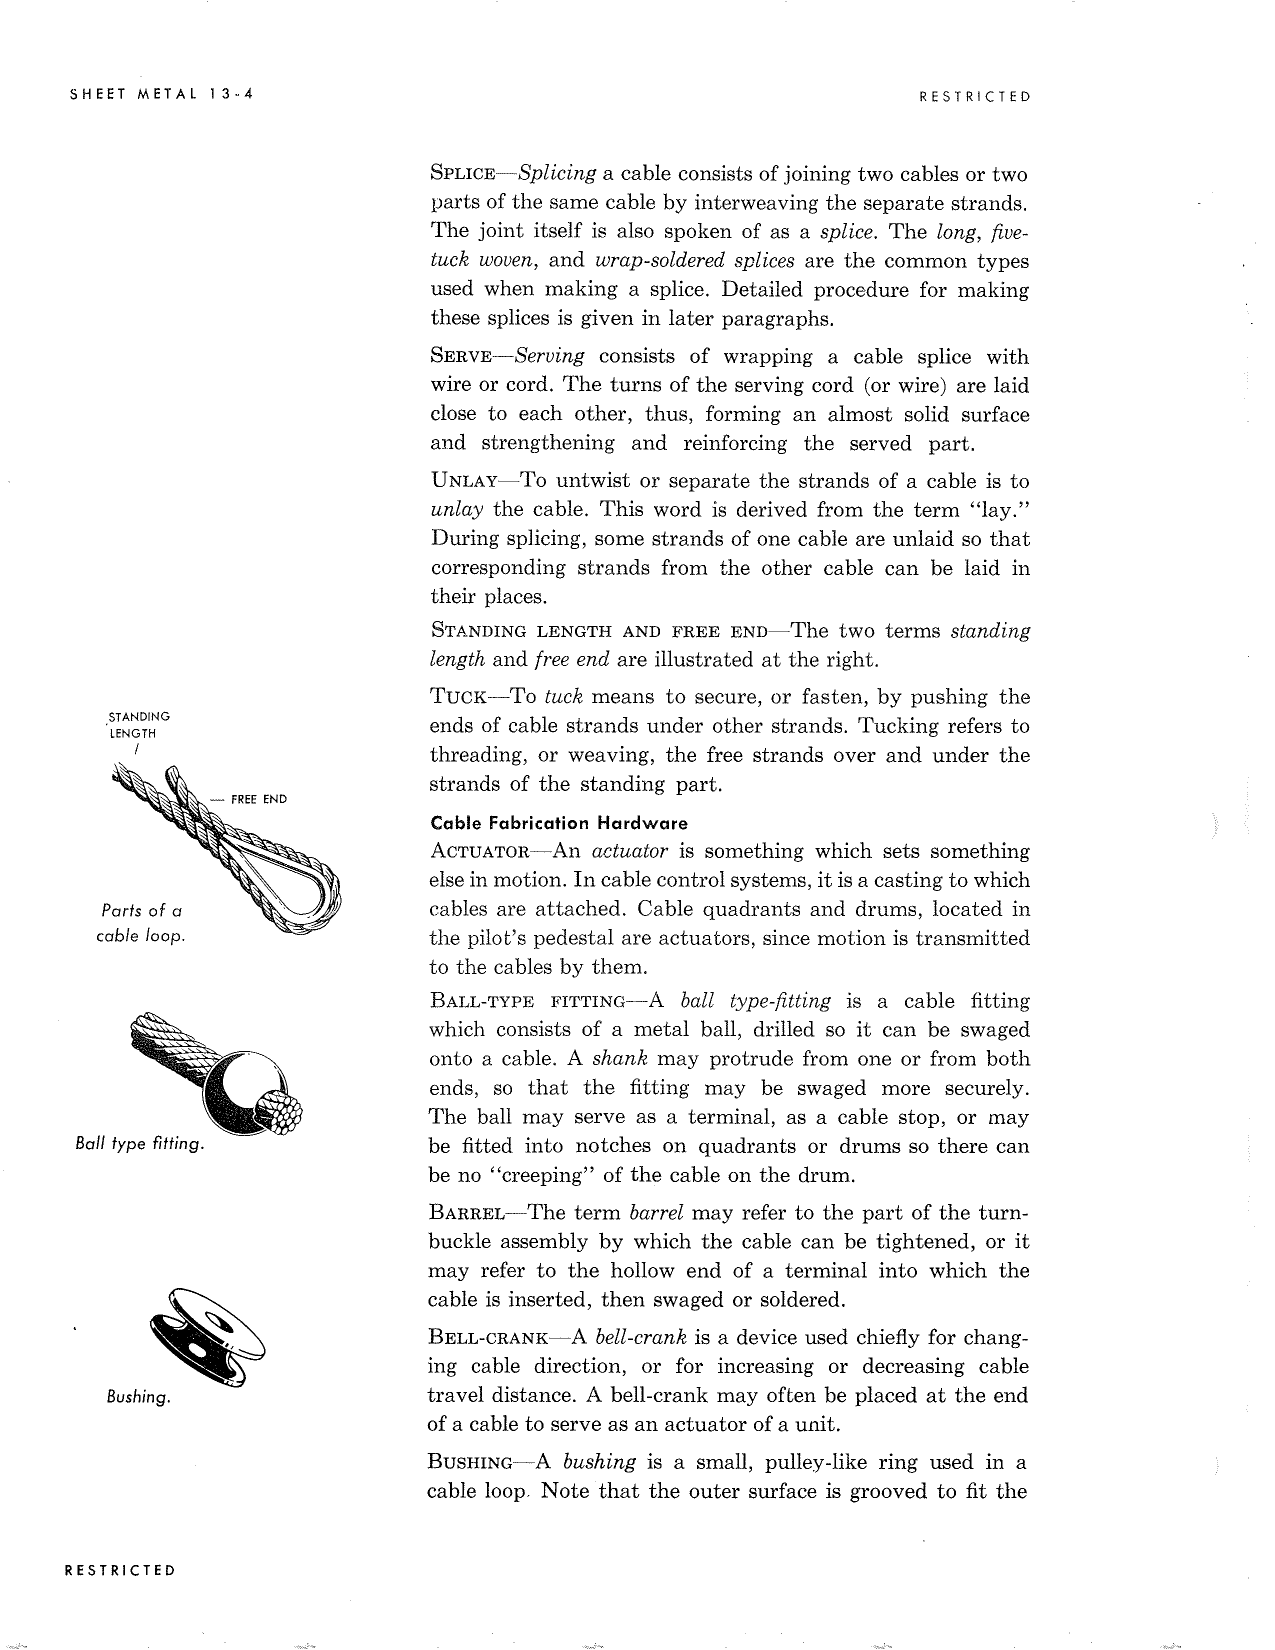 Sample page 214 from AirCorps Library document: Aircraft Sheet Metal Maintenance 